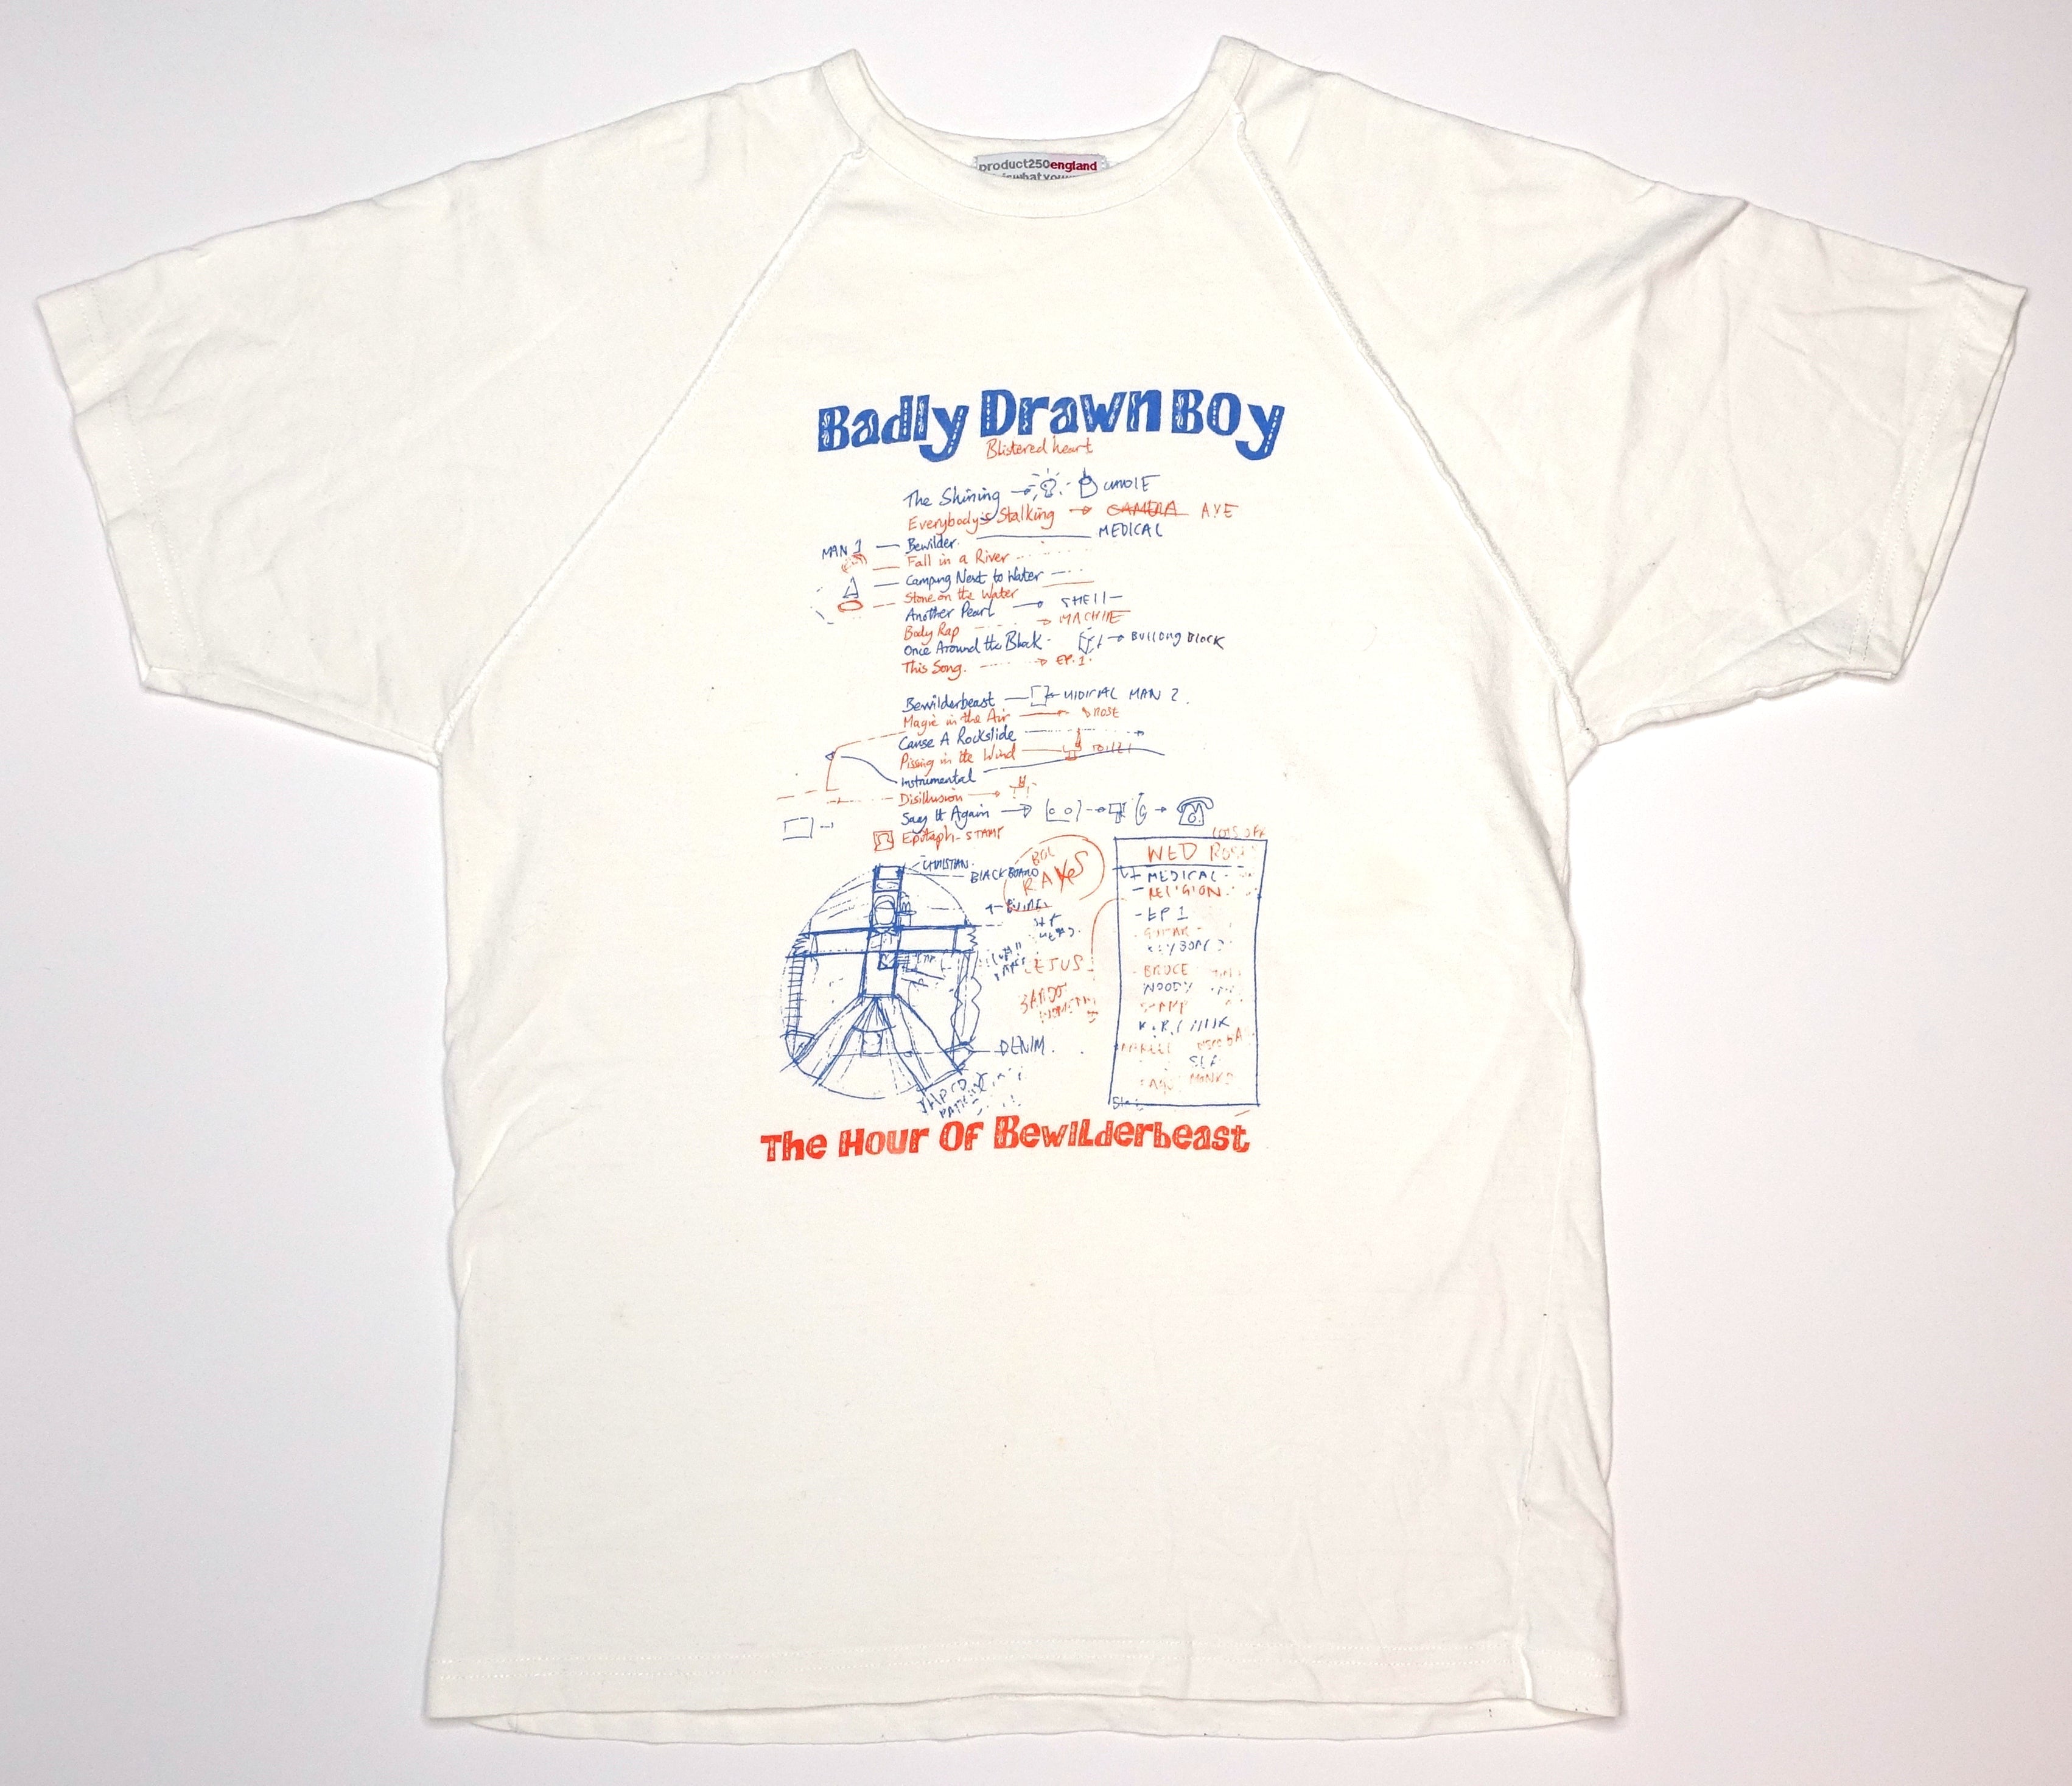 Badly Drawn Boy – The Hour Of Bewilderbeast 2000 UK Promo Shirt Size Large